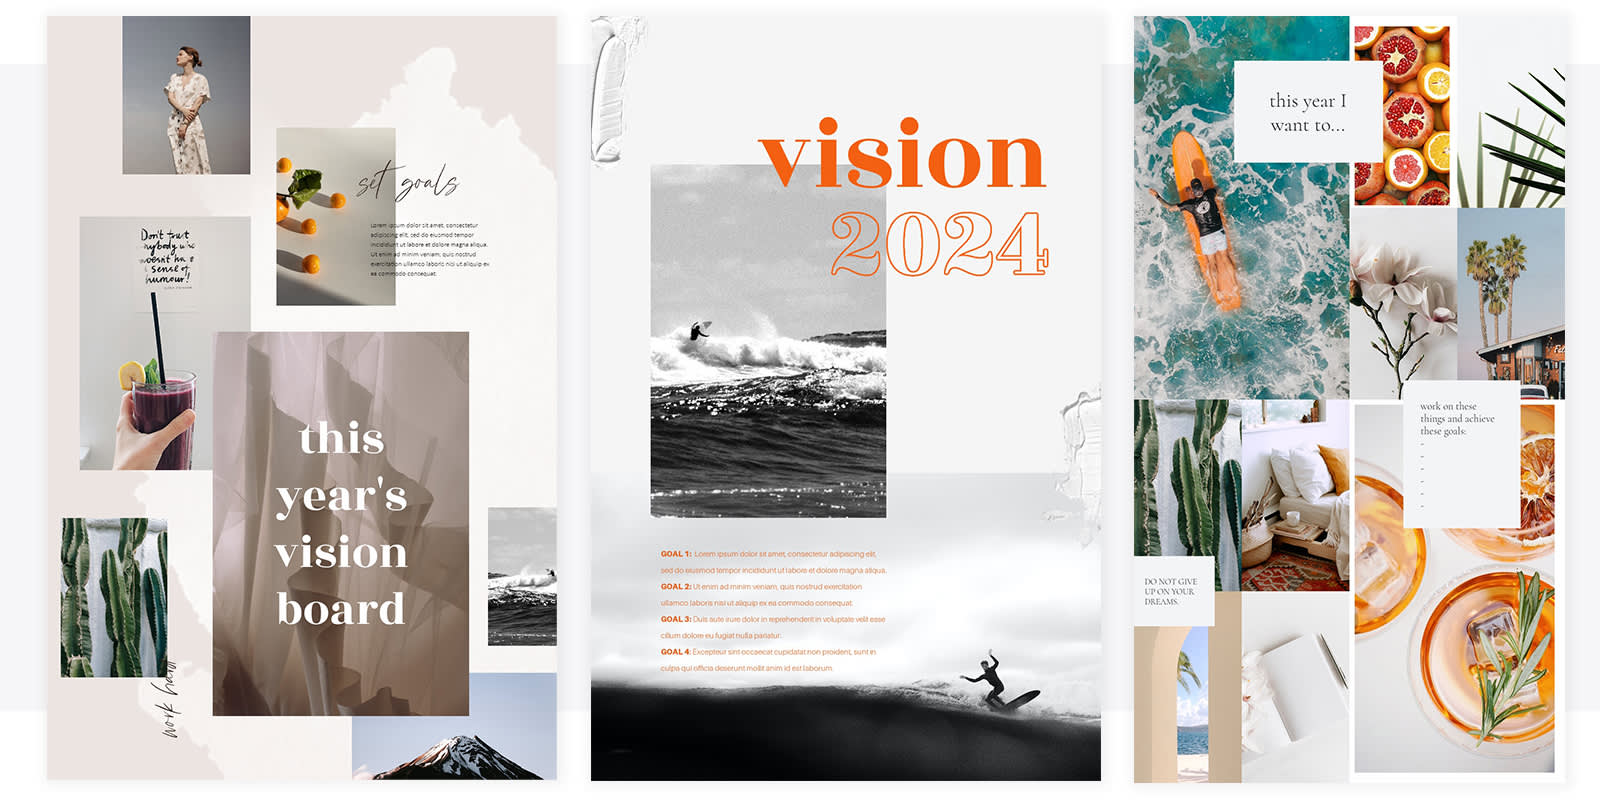 Vision Board Supplies You Need To Make Beautiful Board in 2022